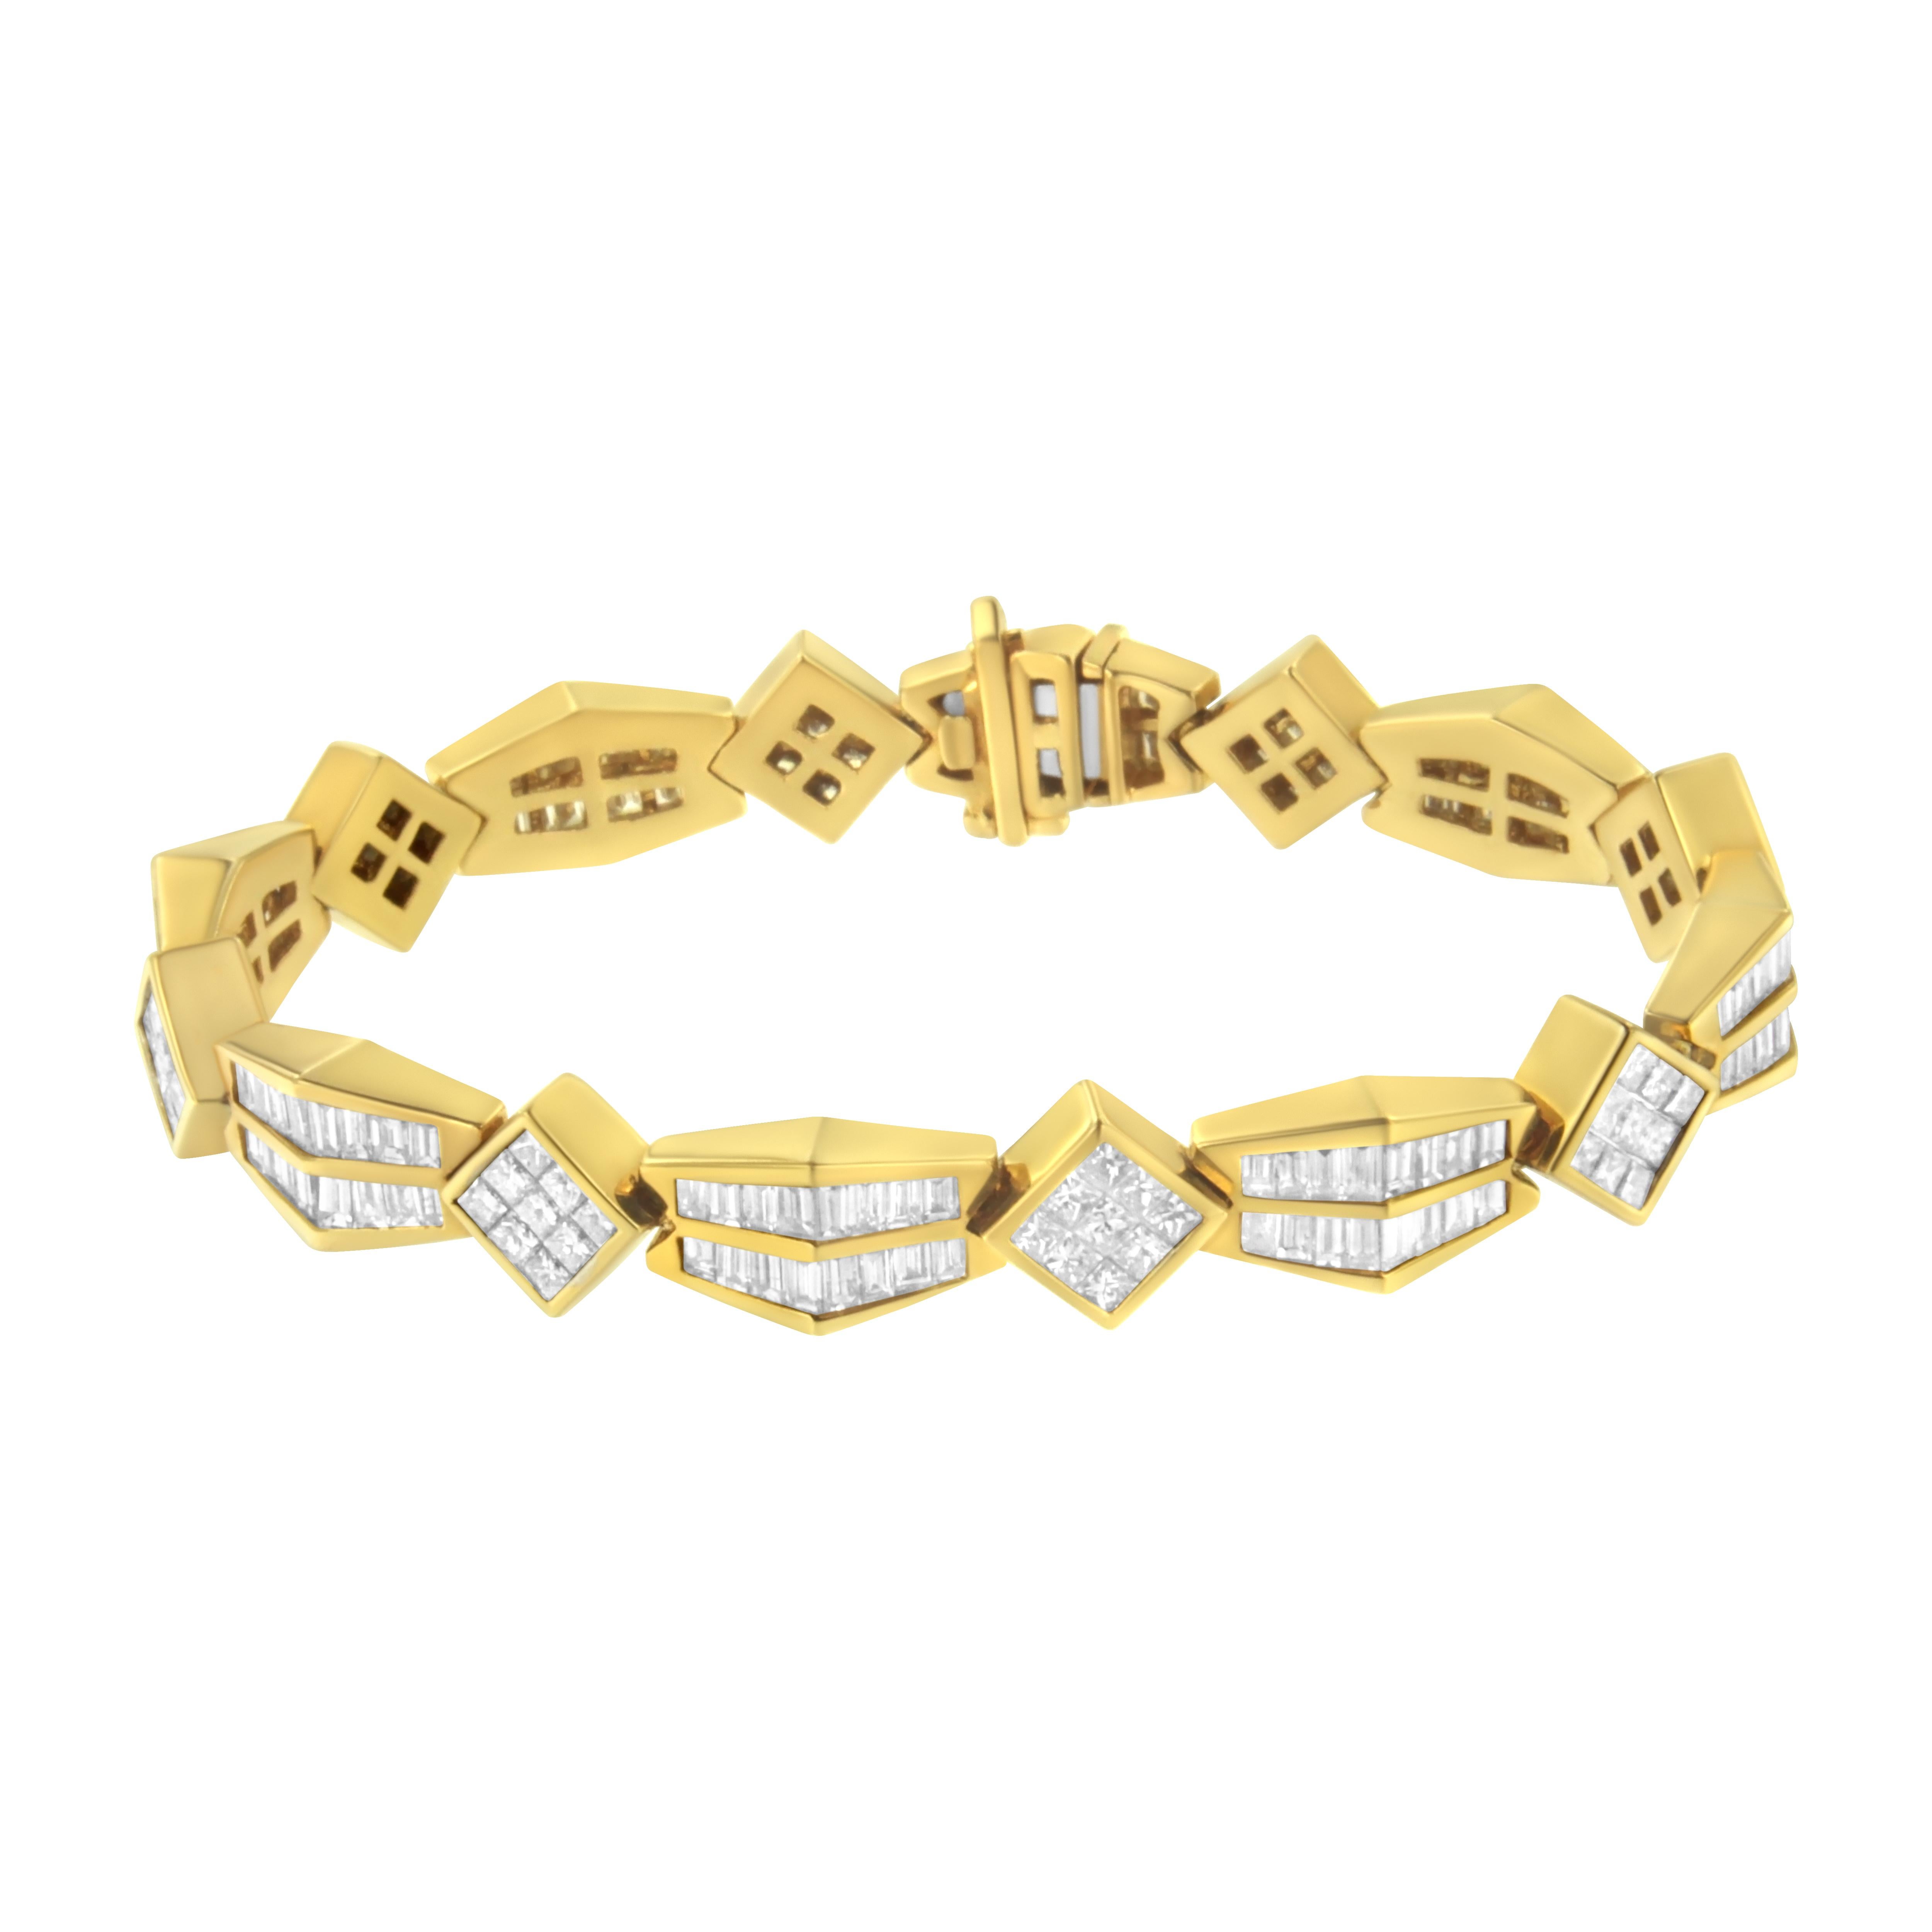 Like a work of art, this bold and brilliant bracelet features over 9 carats of princess cut and baguette-style diamonds just begging to be noticed. Glittering across a band of textured 14 karat yellow gold links, it's a show piece for every